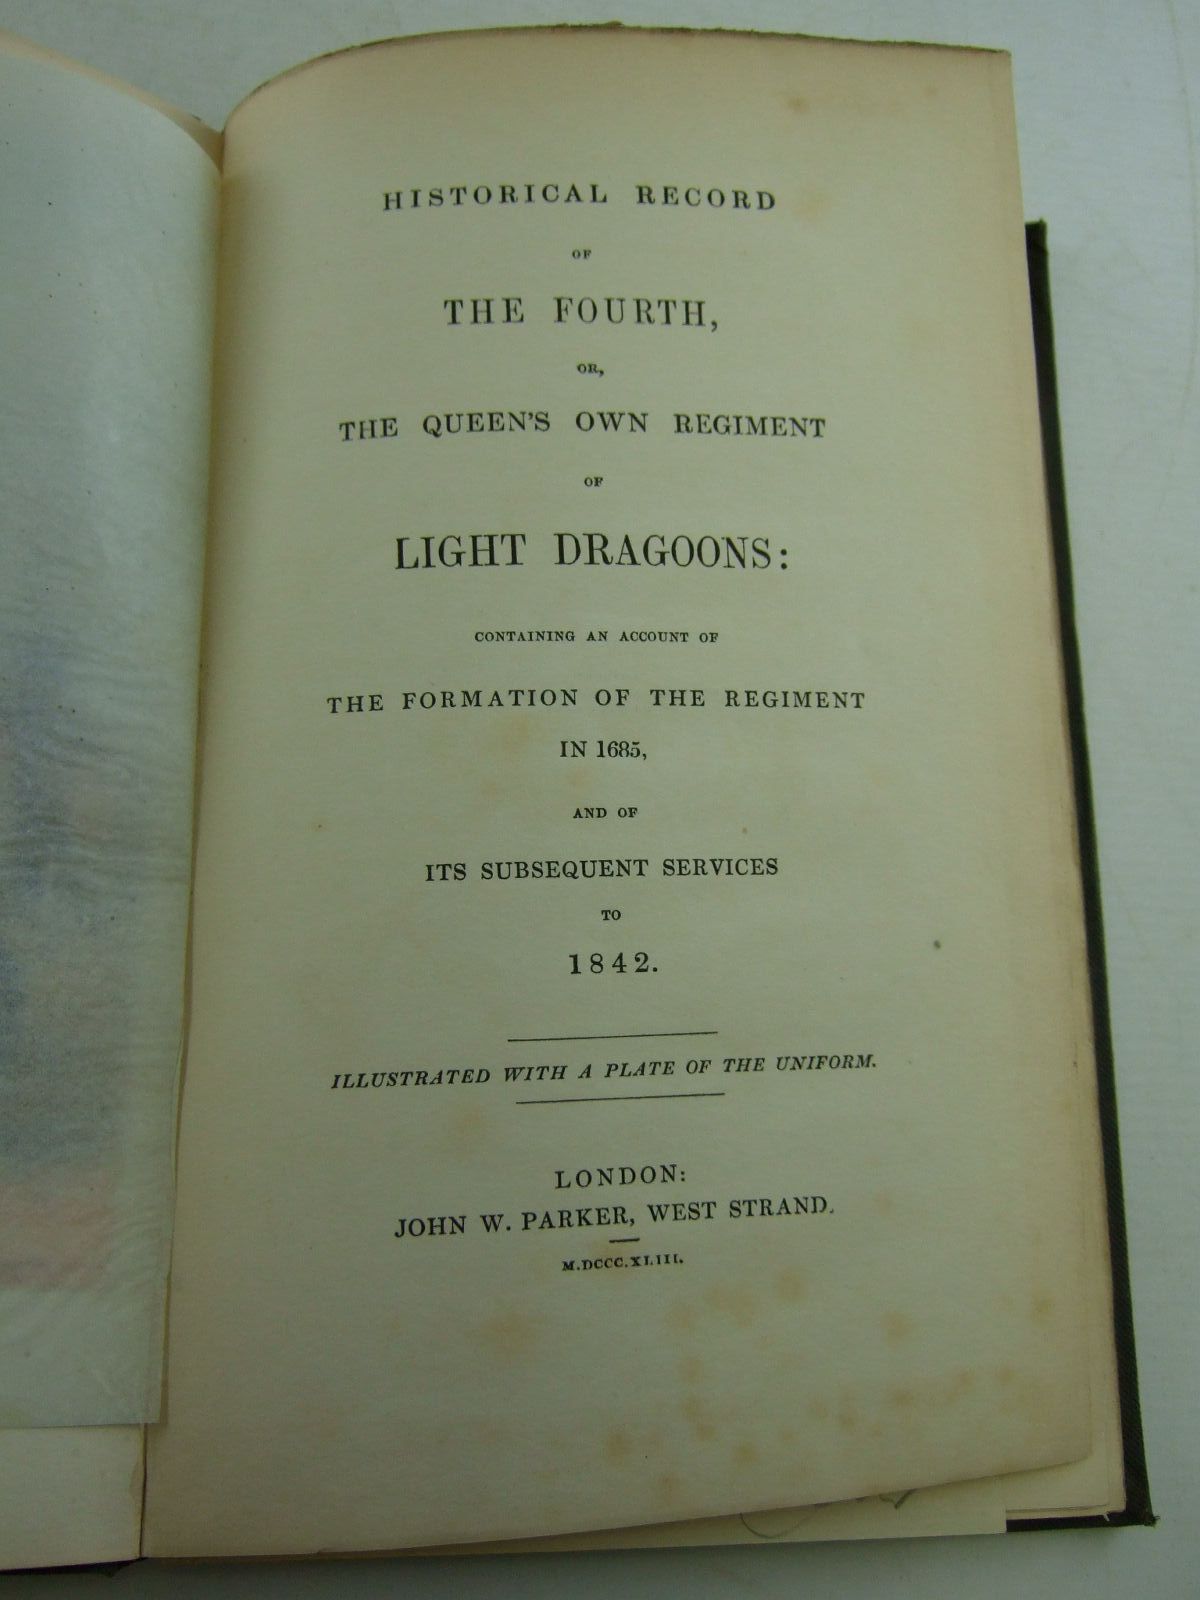 Photo of HISTORICAL RECORD OF THE FOURTH OR THE QUEEN'S OWN REGIMENT OF LIGHT DRAGOONS written by Cannon, Richard published by John W. Parker (STOCK CODE: 1706922)  for sale by Stella & Rose's Books